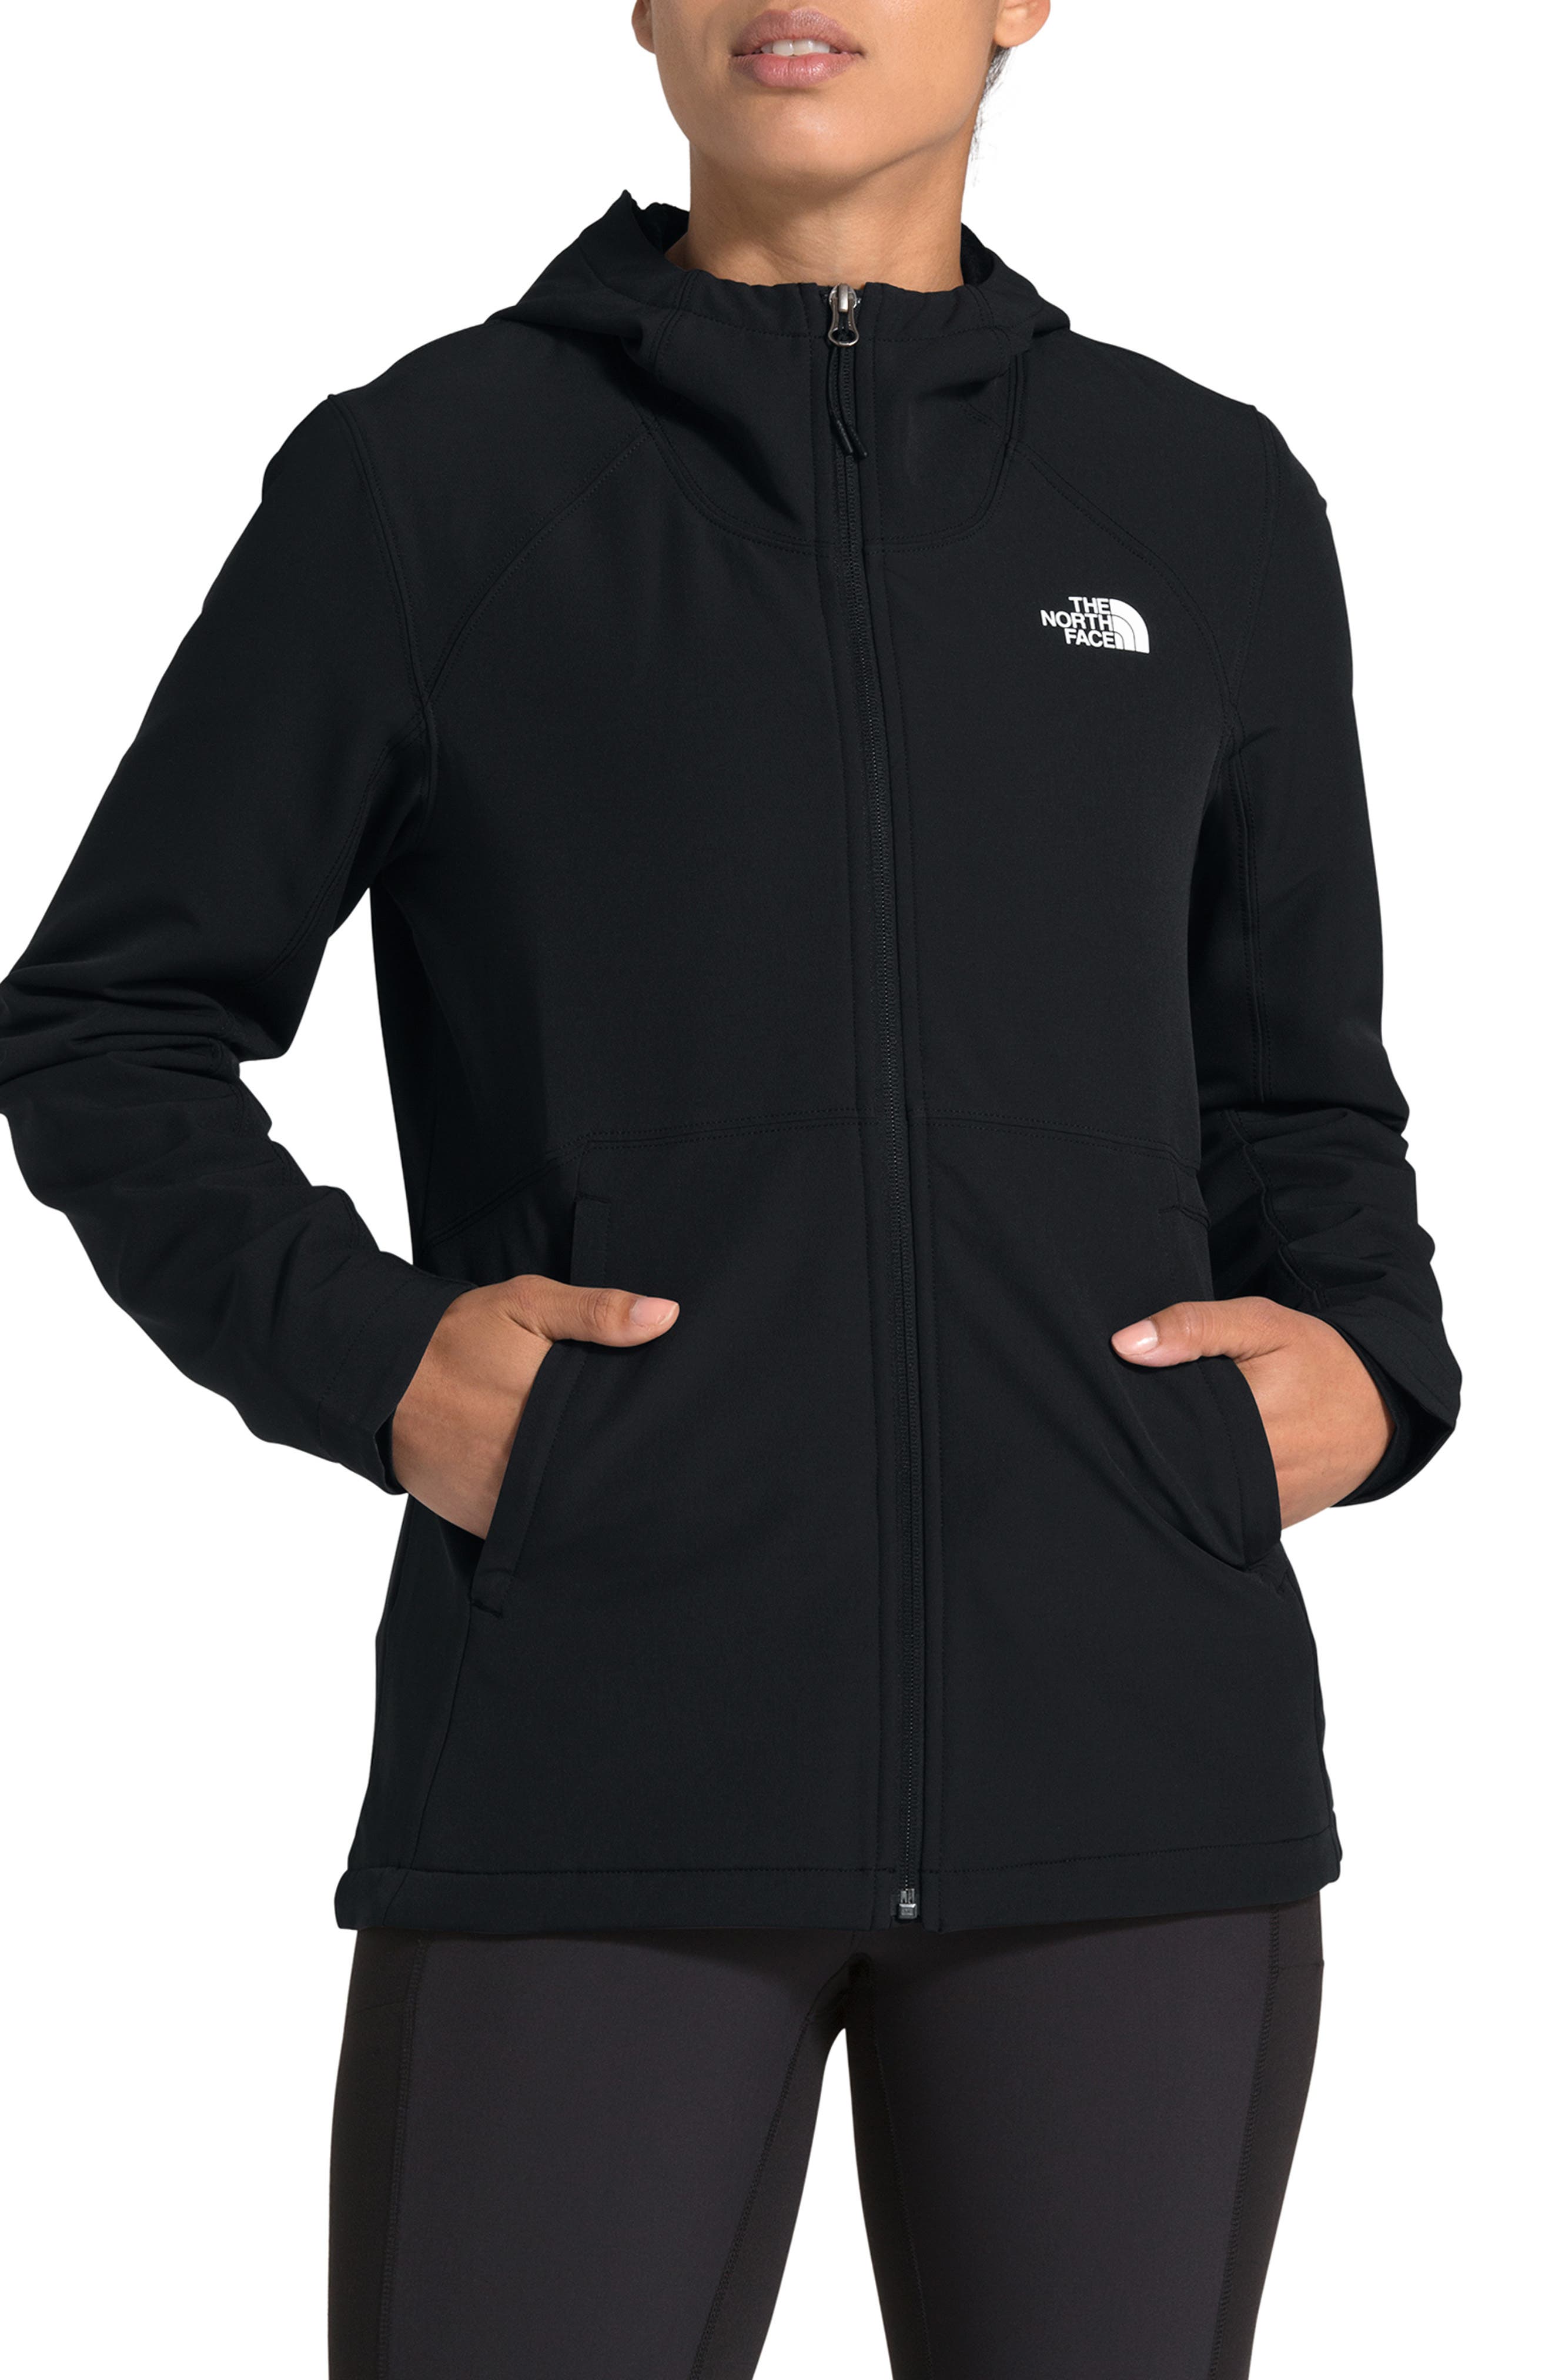 the north face shelbe raschel jacket for ladies